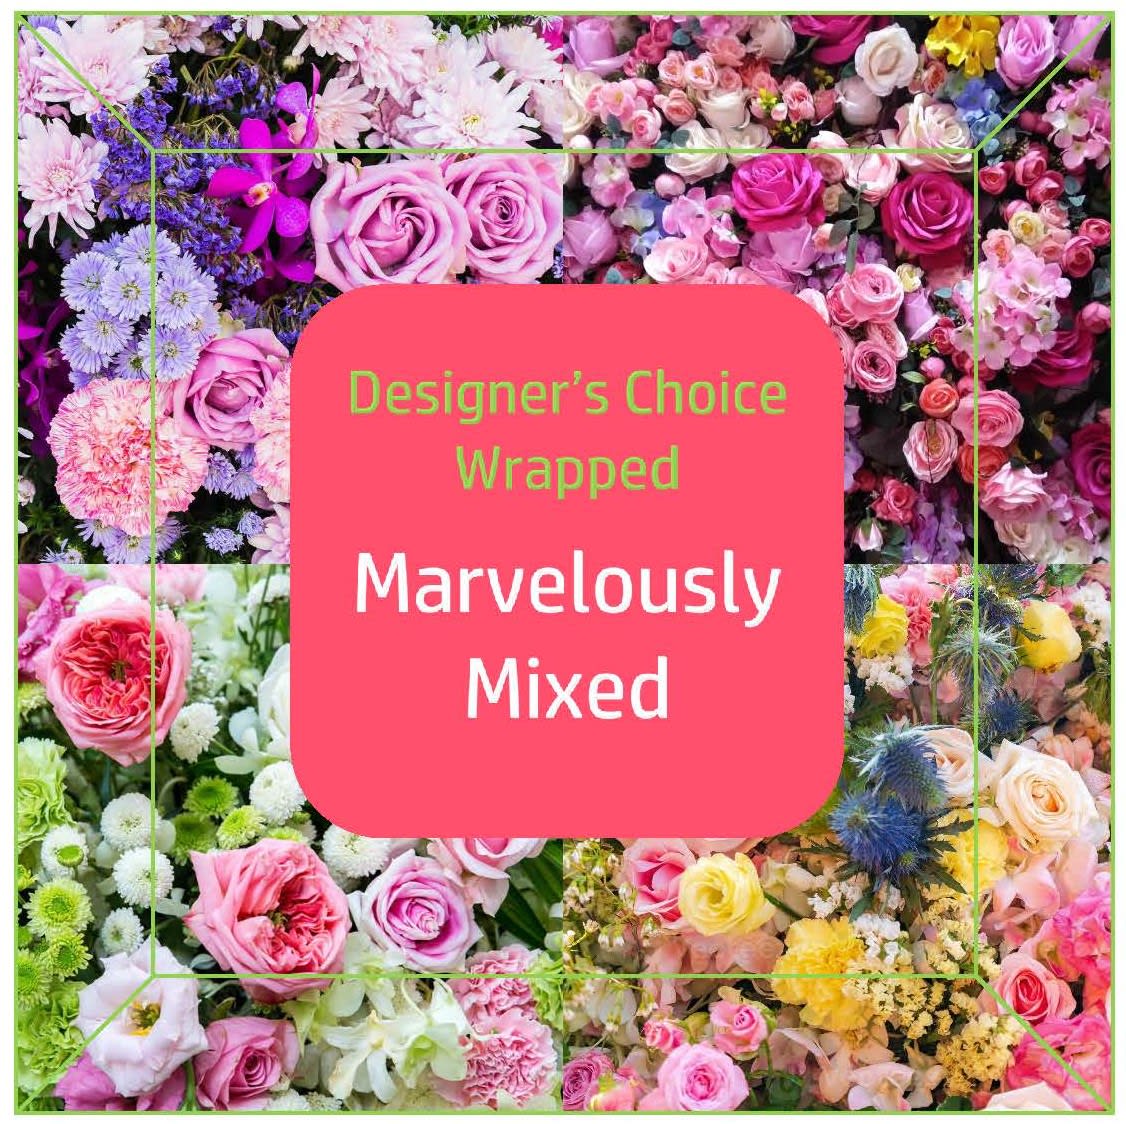 Designer's Choice (Wrapped) Marvelously Mixed - Colors are marvelously mixed together in this made-on-the-spot wrapped floral bouquet filled with an assortment of colorful blooms! Our expert designer will hand-select the freshest of our seasonal blooms and design them into a beautiful wrapped bouquet, all tied together with a lovely bow! (NO VASE) Sizes and colors will vary. If you like a certain color more than another or you want us to avoid any type of flower, please leave a note in the special instructions.